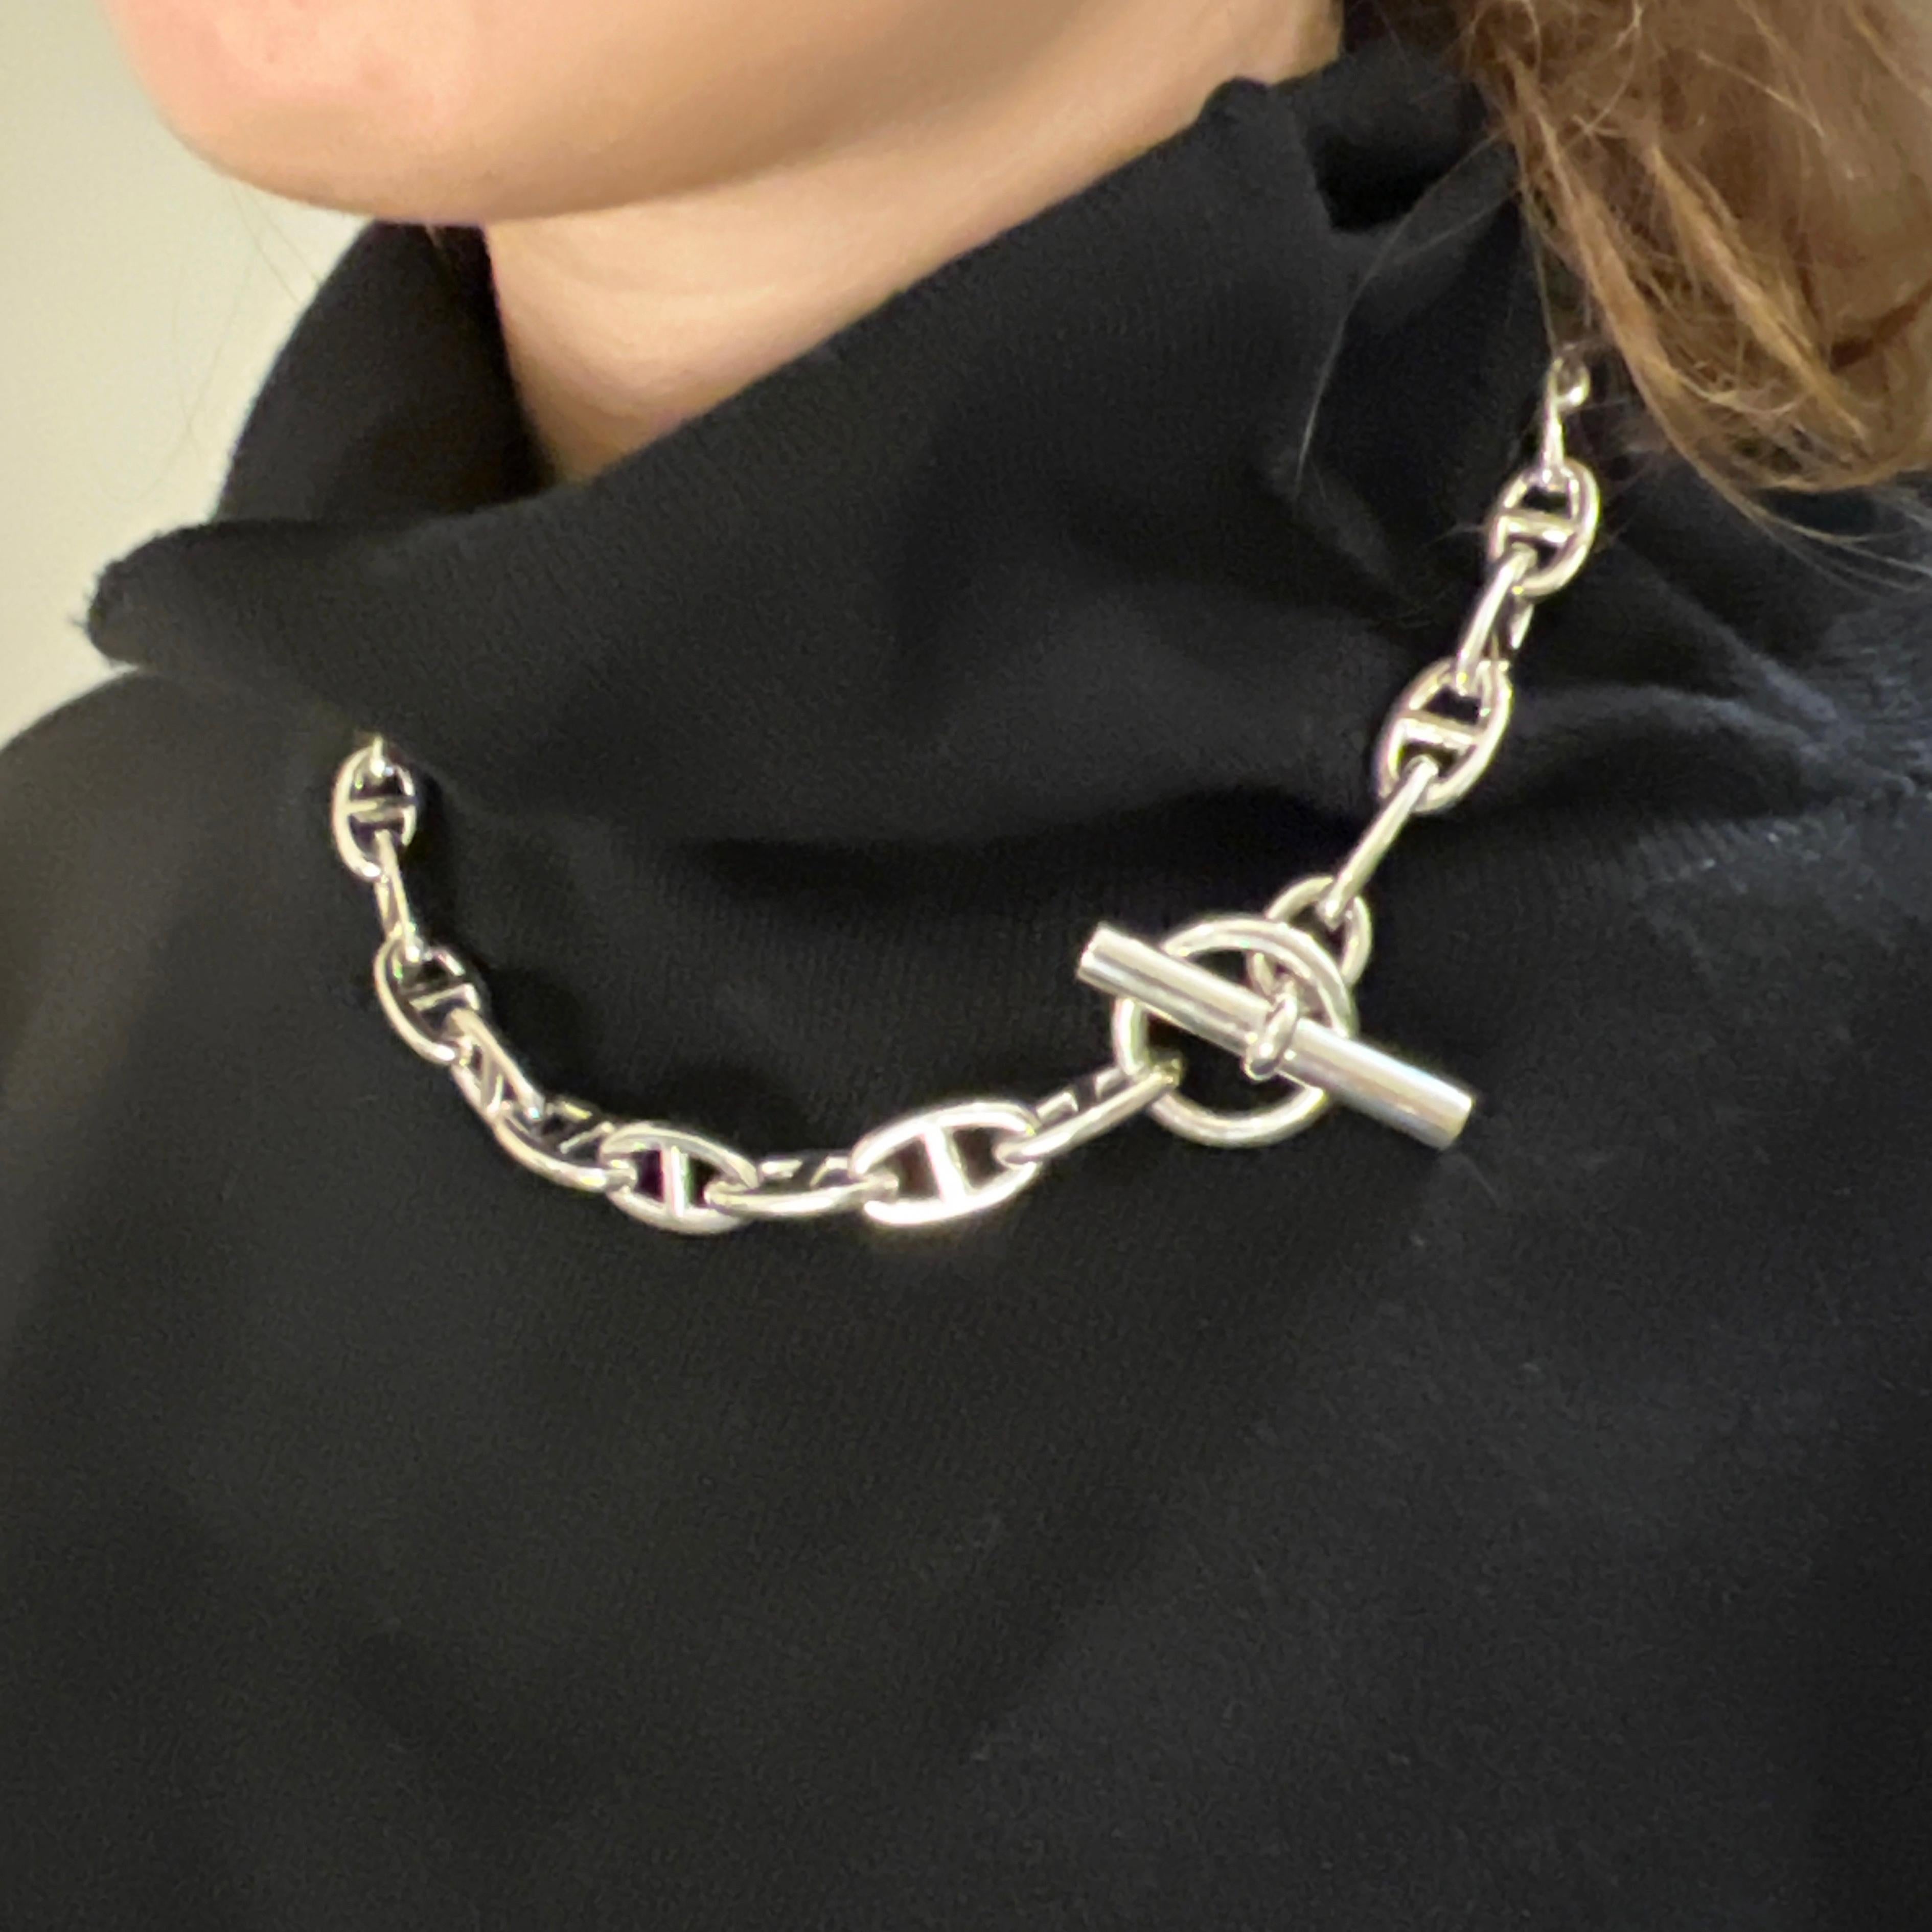 Hermès Chaine D'ancre Sterling Silver Necklace, circa 1995 For Sale 3